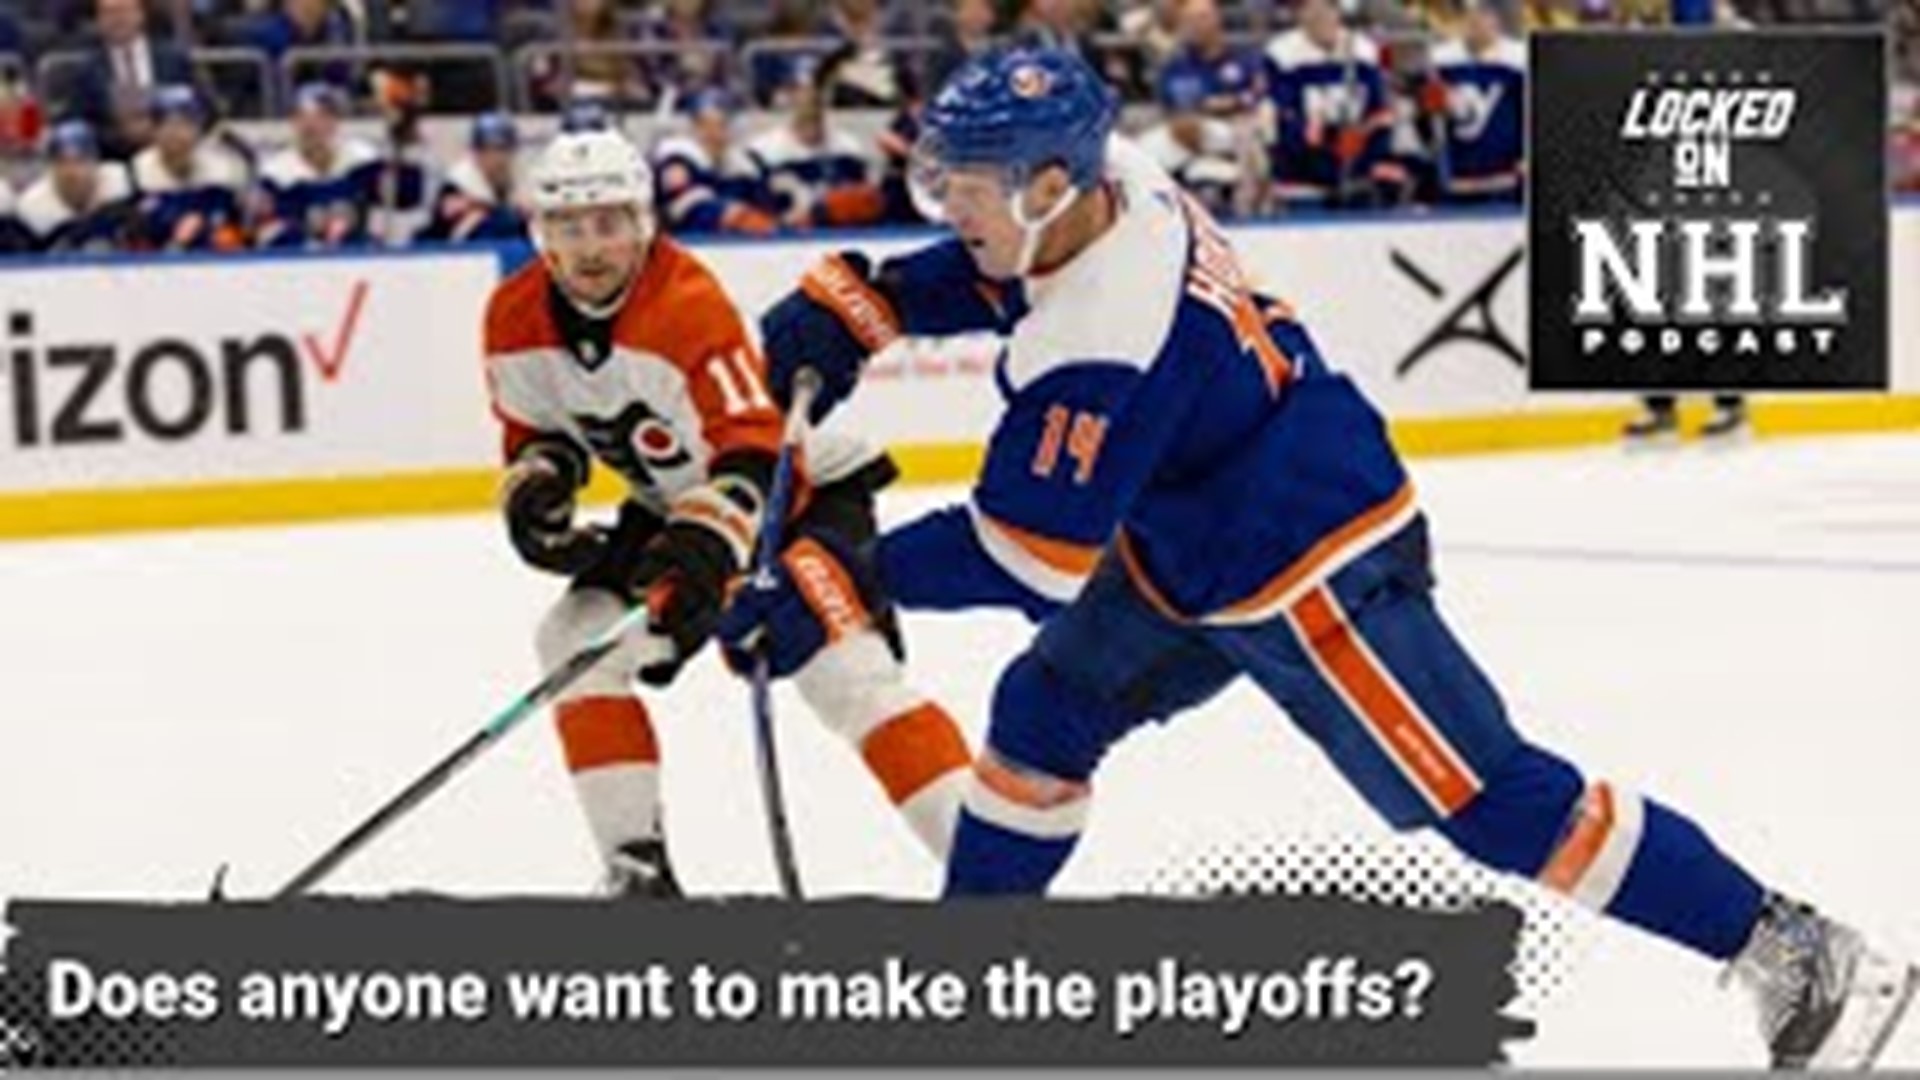 The NHL's 16 playoff spots are mostly spoken for with 14 almost assuredly locked up by various tiers of contenders ranging from top of the class like Florida.